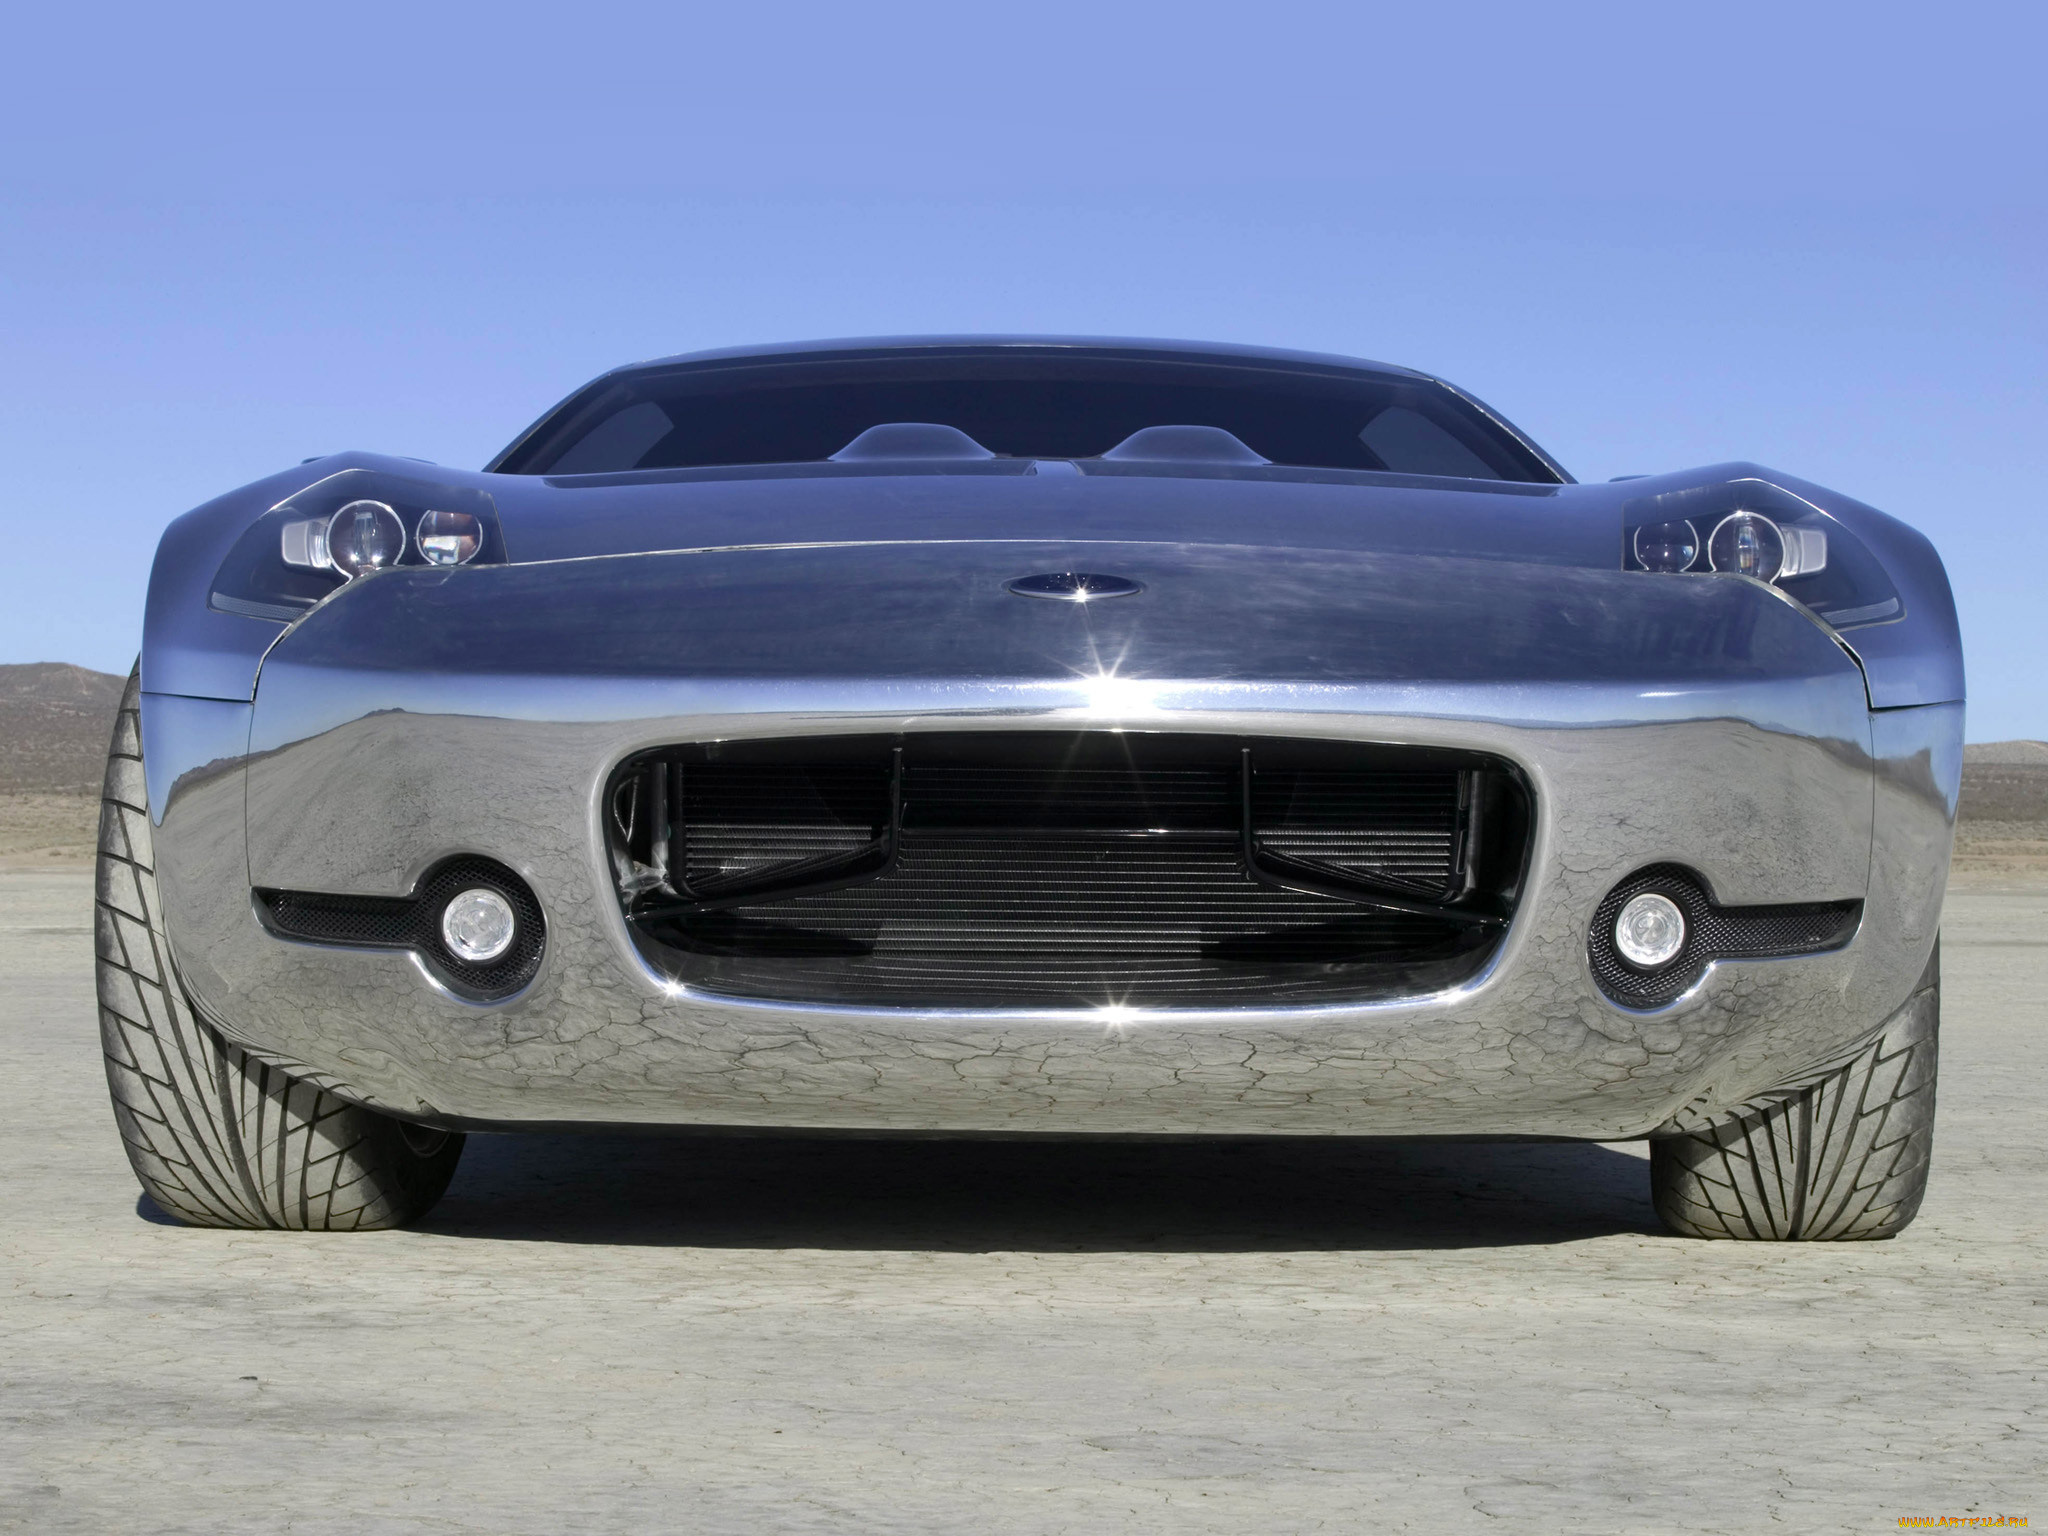 shelby ford gr-1 concept 2005, , ac cobra, shelby, ford, gr-1, concept, 2005